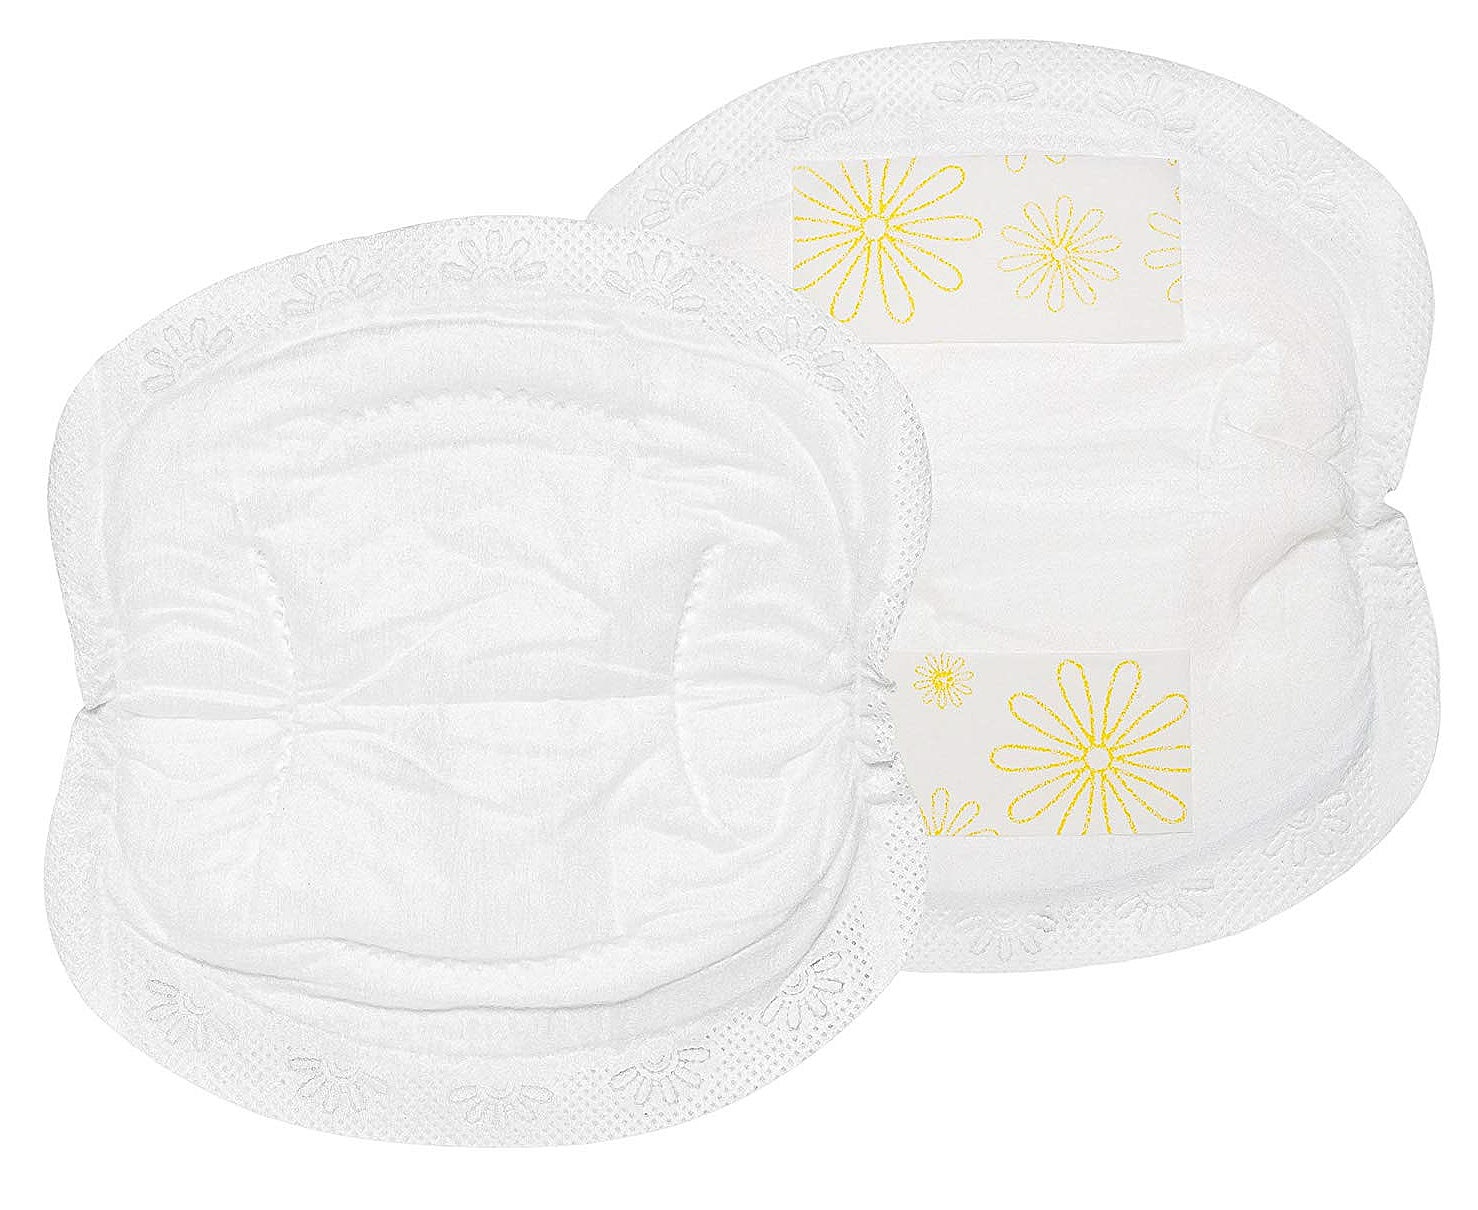 Medela Excellent Absorbency Leak Protection Double Adhesive Keeps Pads in Place Nursing Disposable Breast Pads